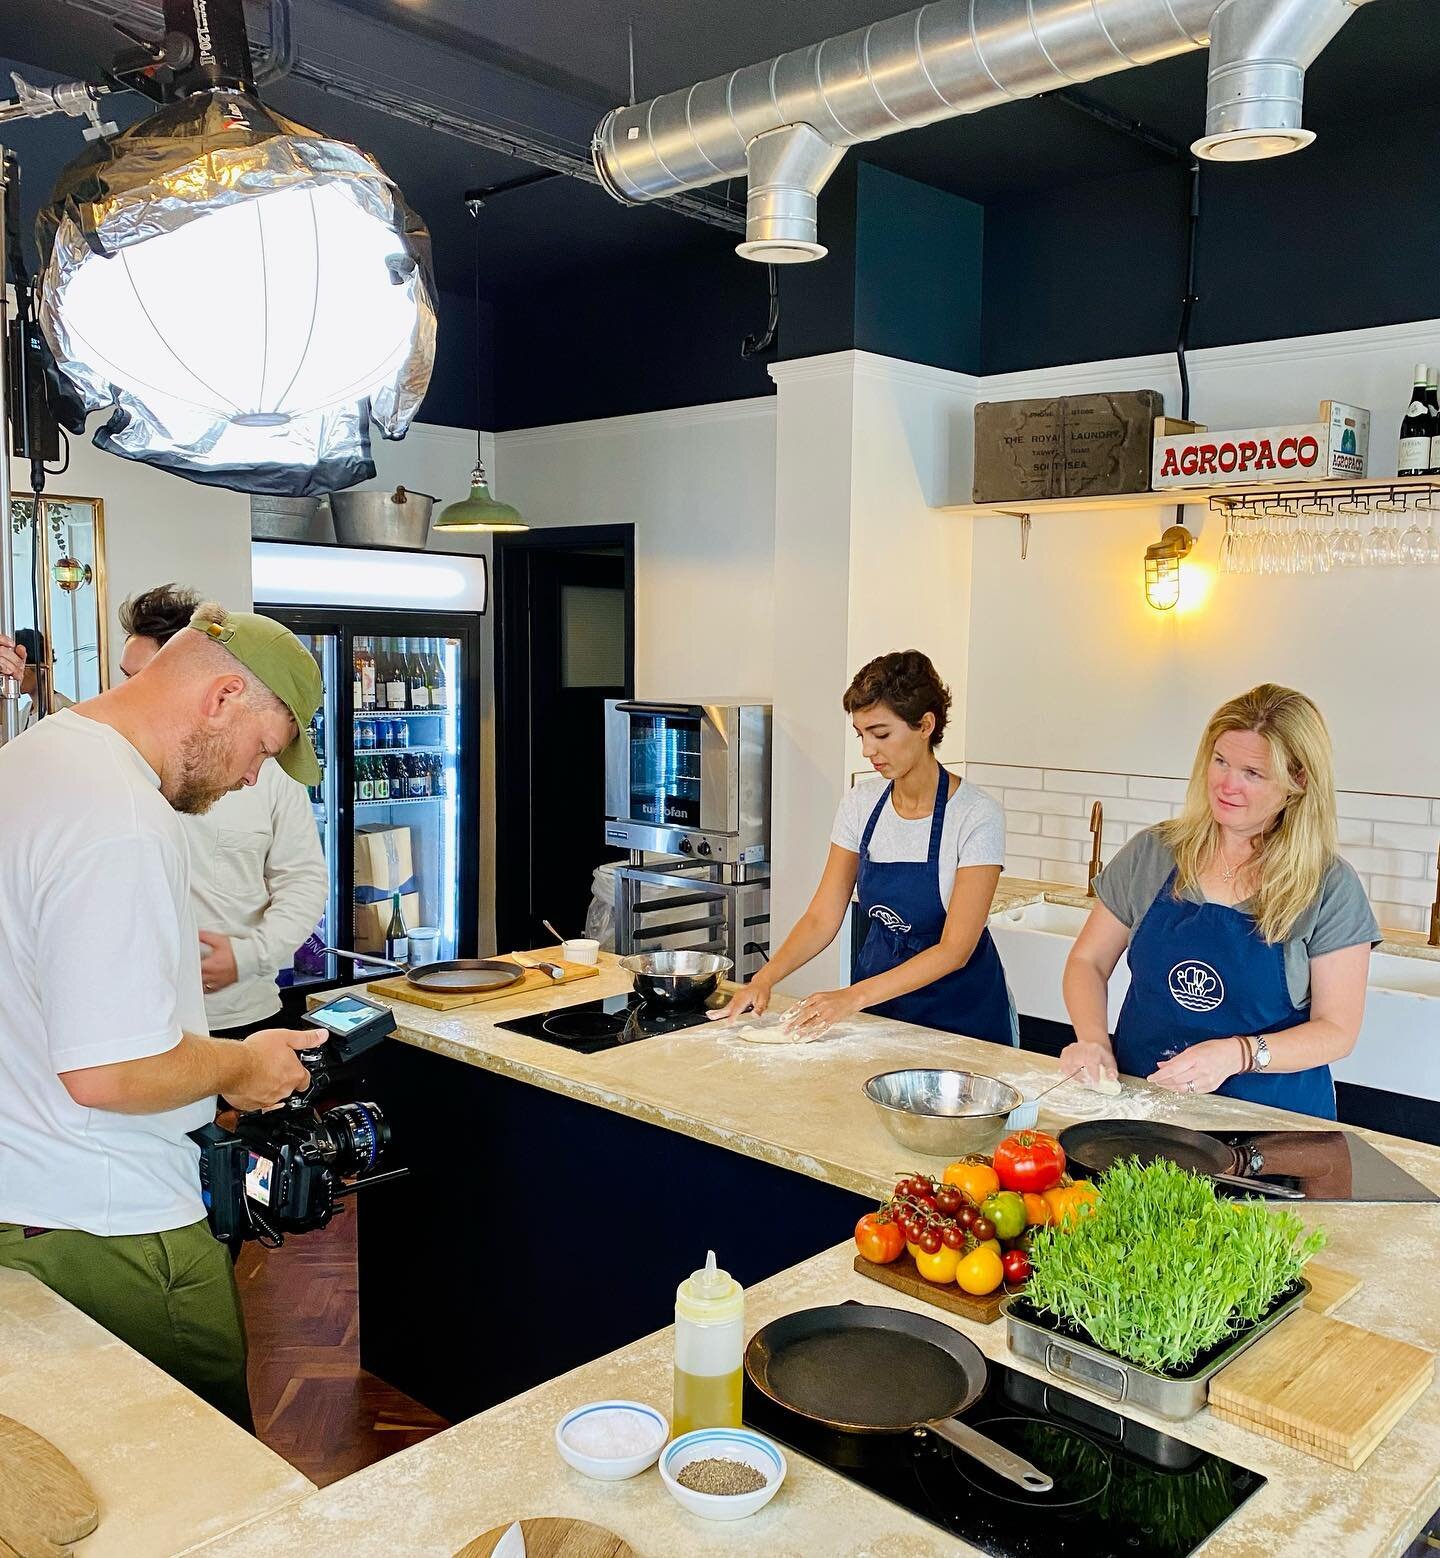 It was great fun having our space hired this morning for filming. Super friendly film crew, and fabulous cast too ;)

I didn&rsquo;t realise film crews could inhale quite so many flat whites either! 

We&rsquo;re always happy for our workshop, cafe o